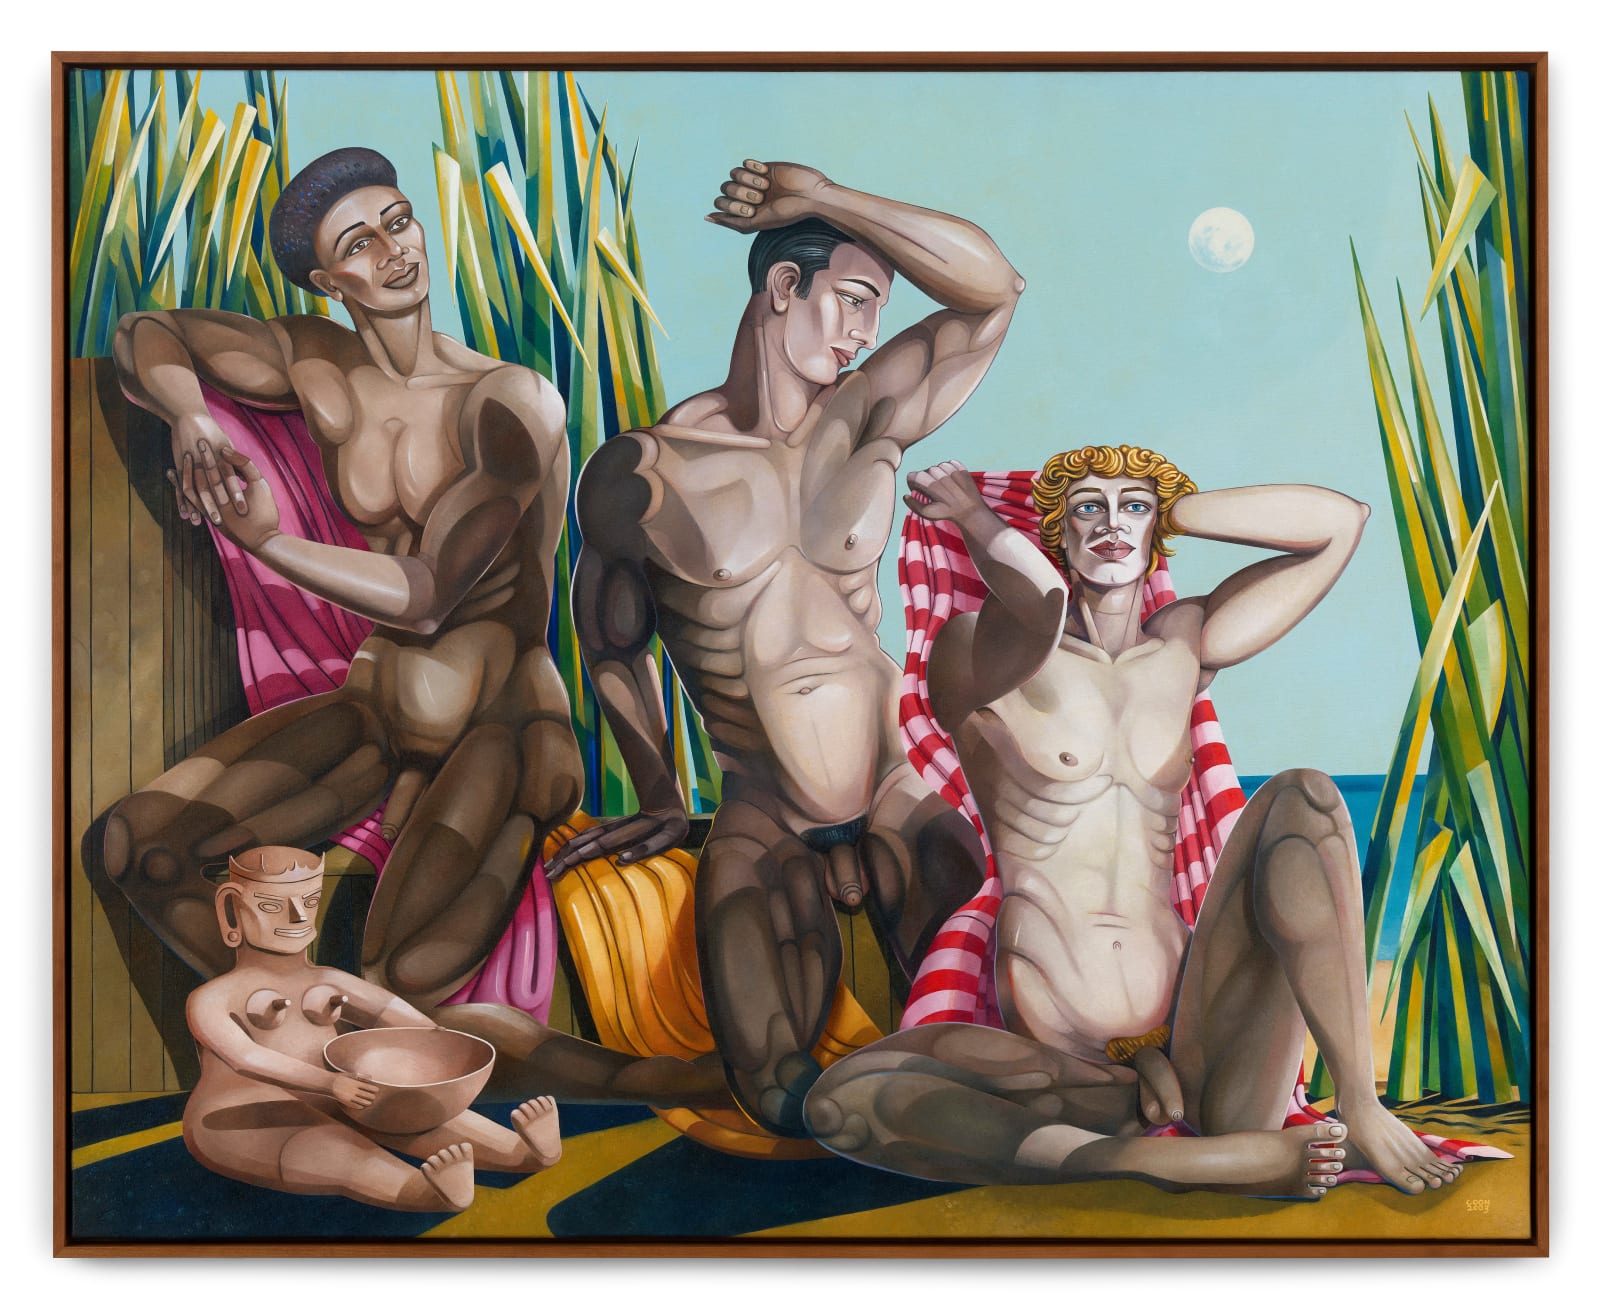 <div class="artist">Caroline Coon</div><div class="title_and_year"><span class="title">Adonis, Grace and Fertility</span><span class="year">, 2003</span></div>